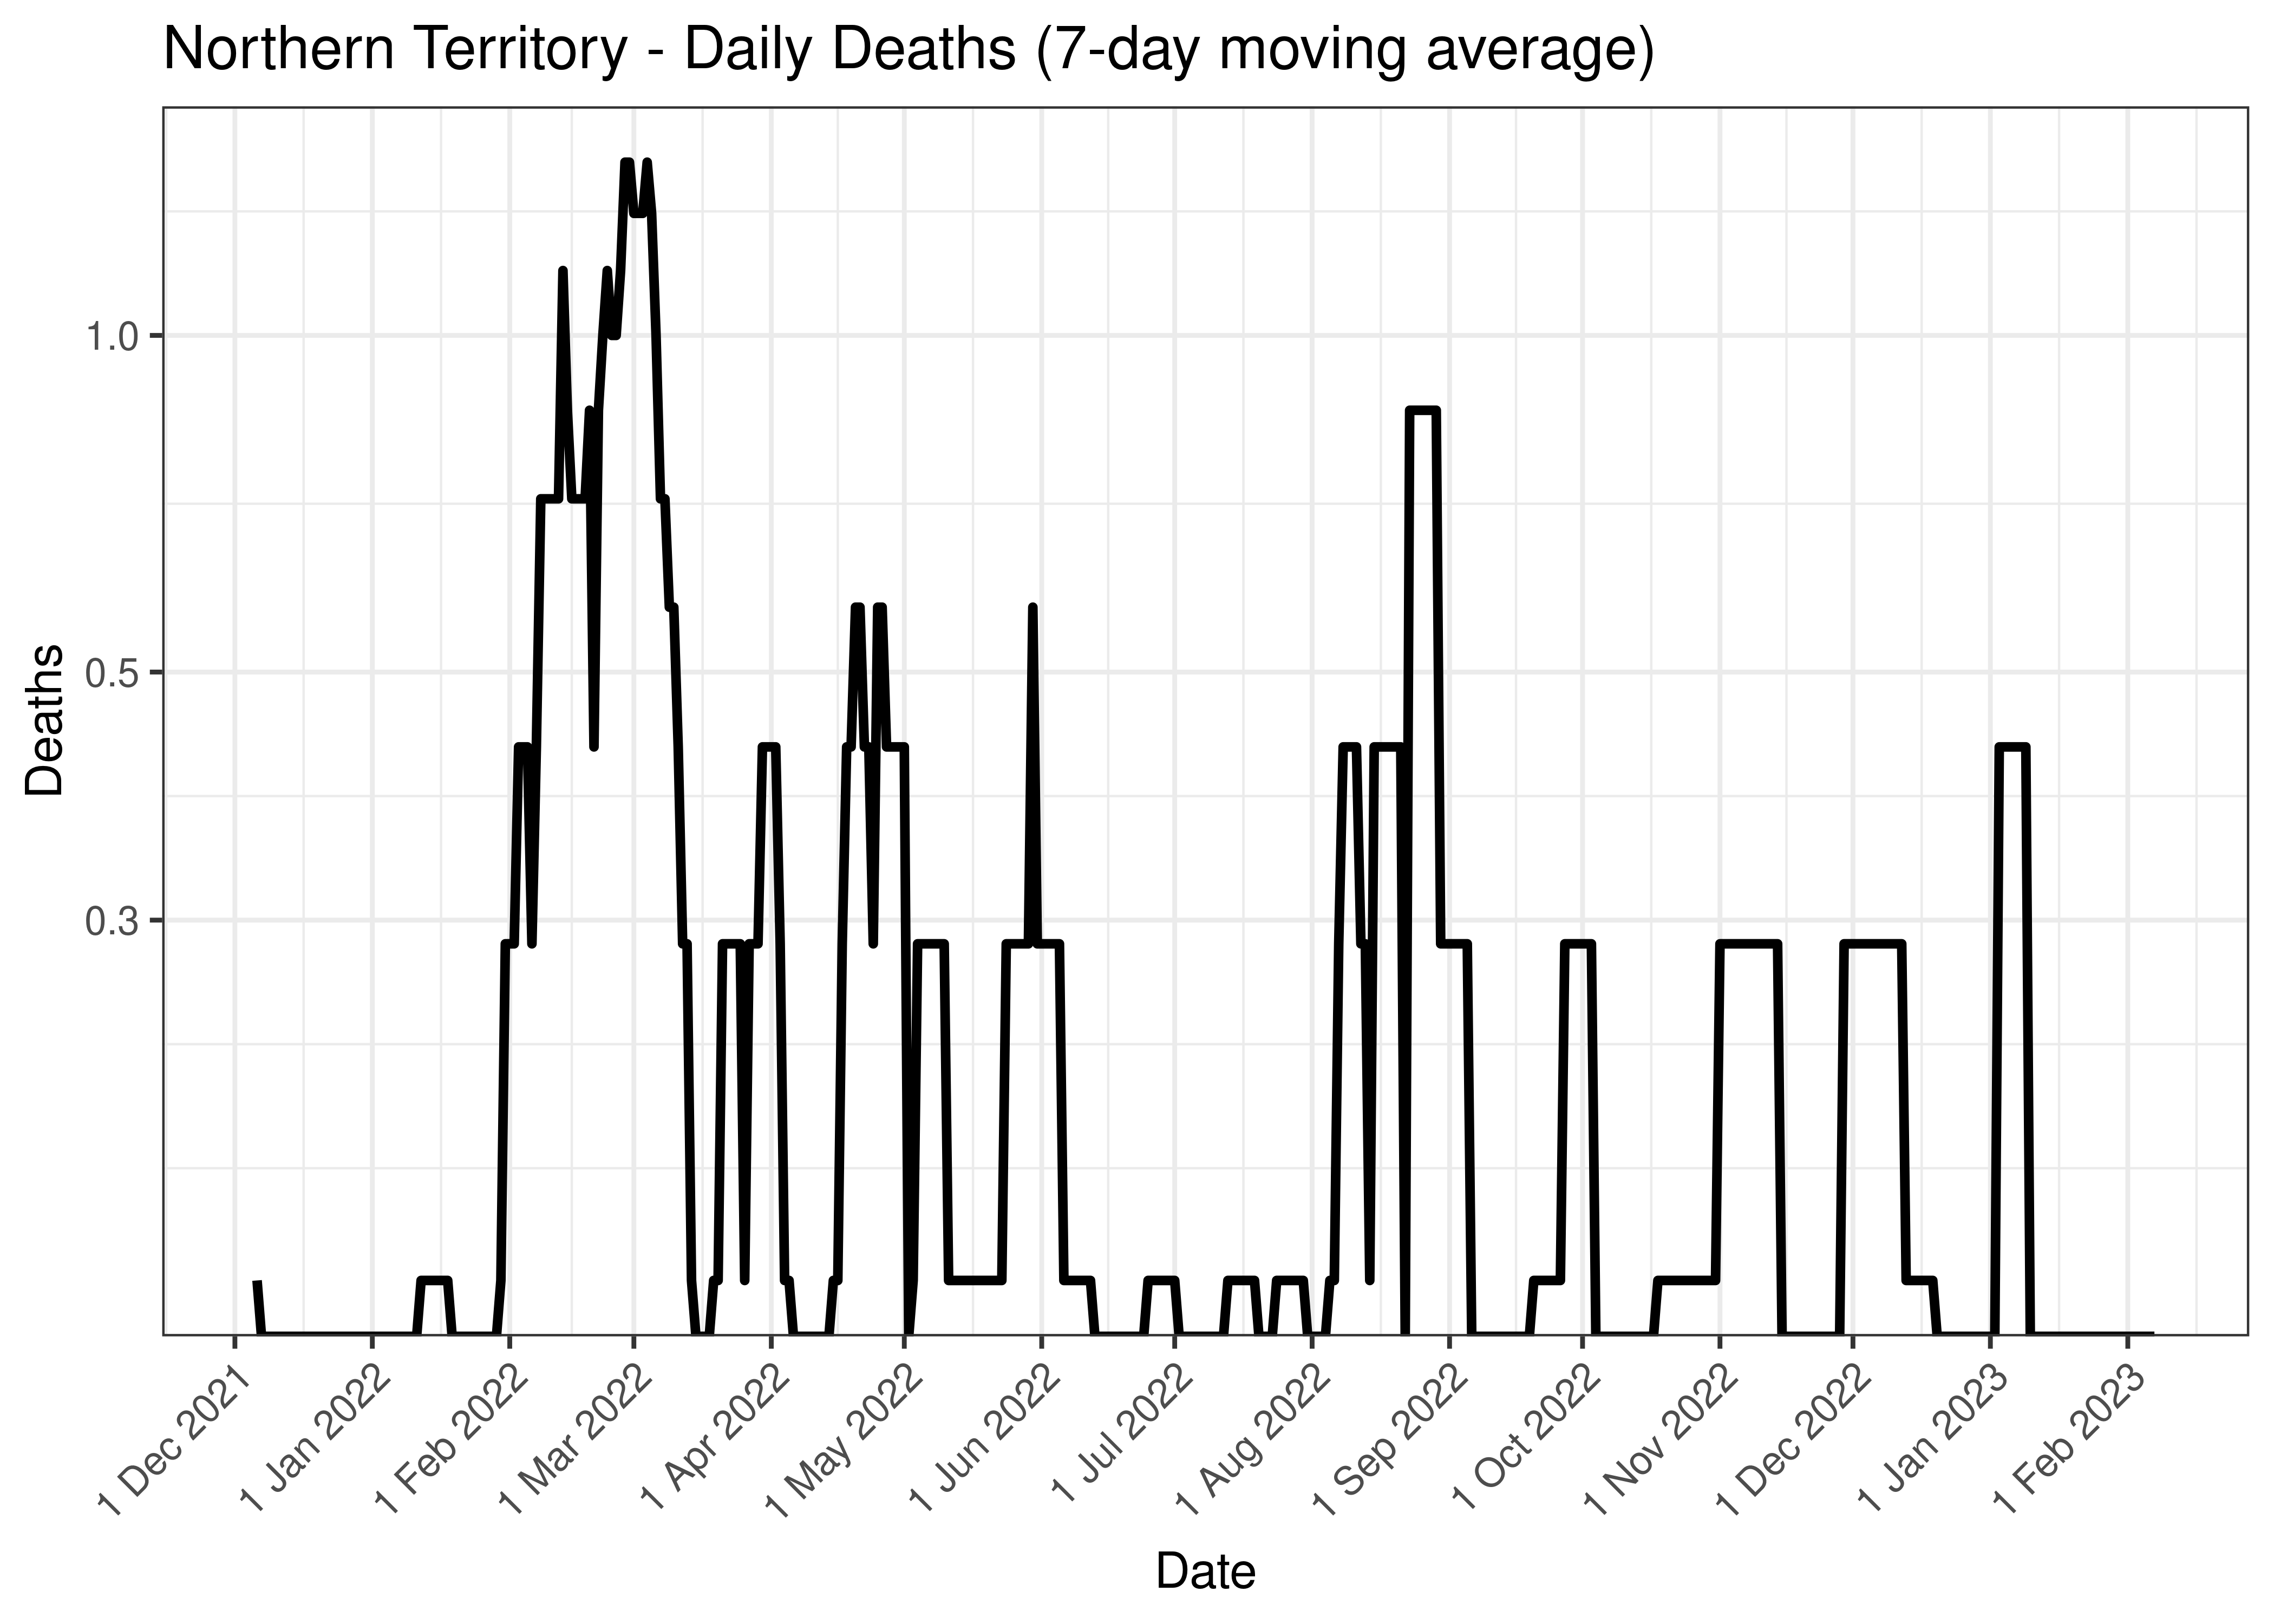 Northern Territory - Daily ICU Counts (7-day moving average)